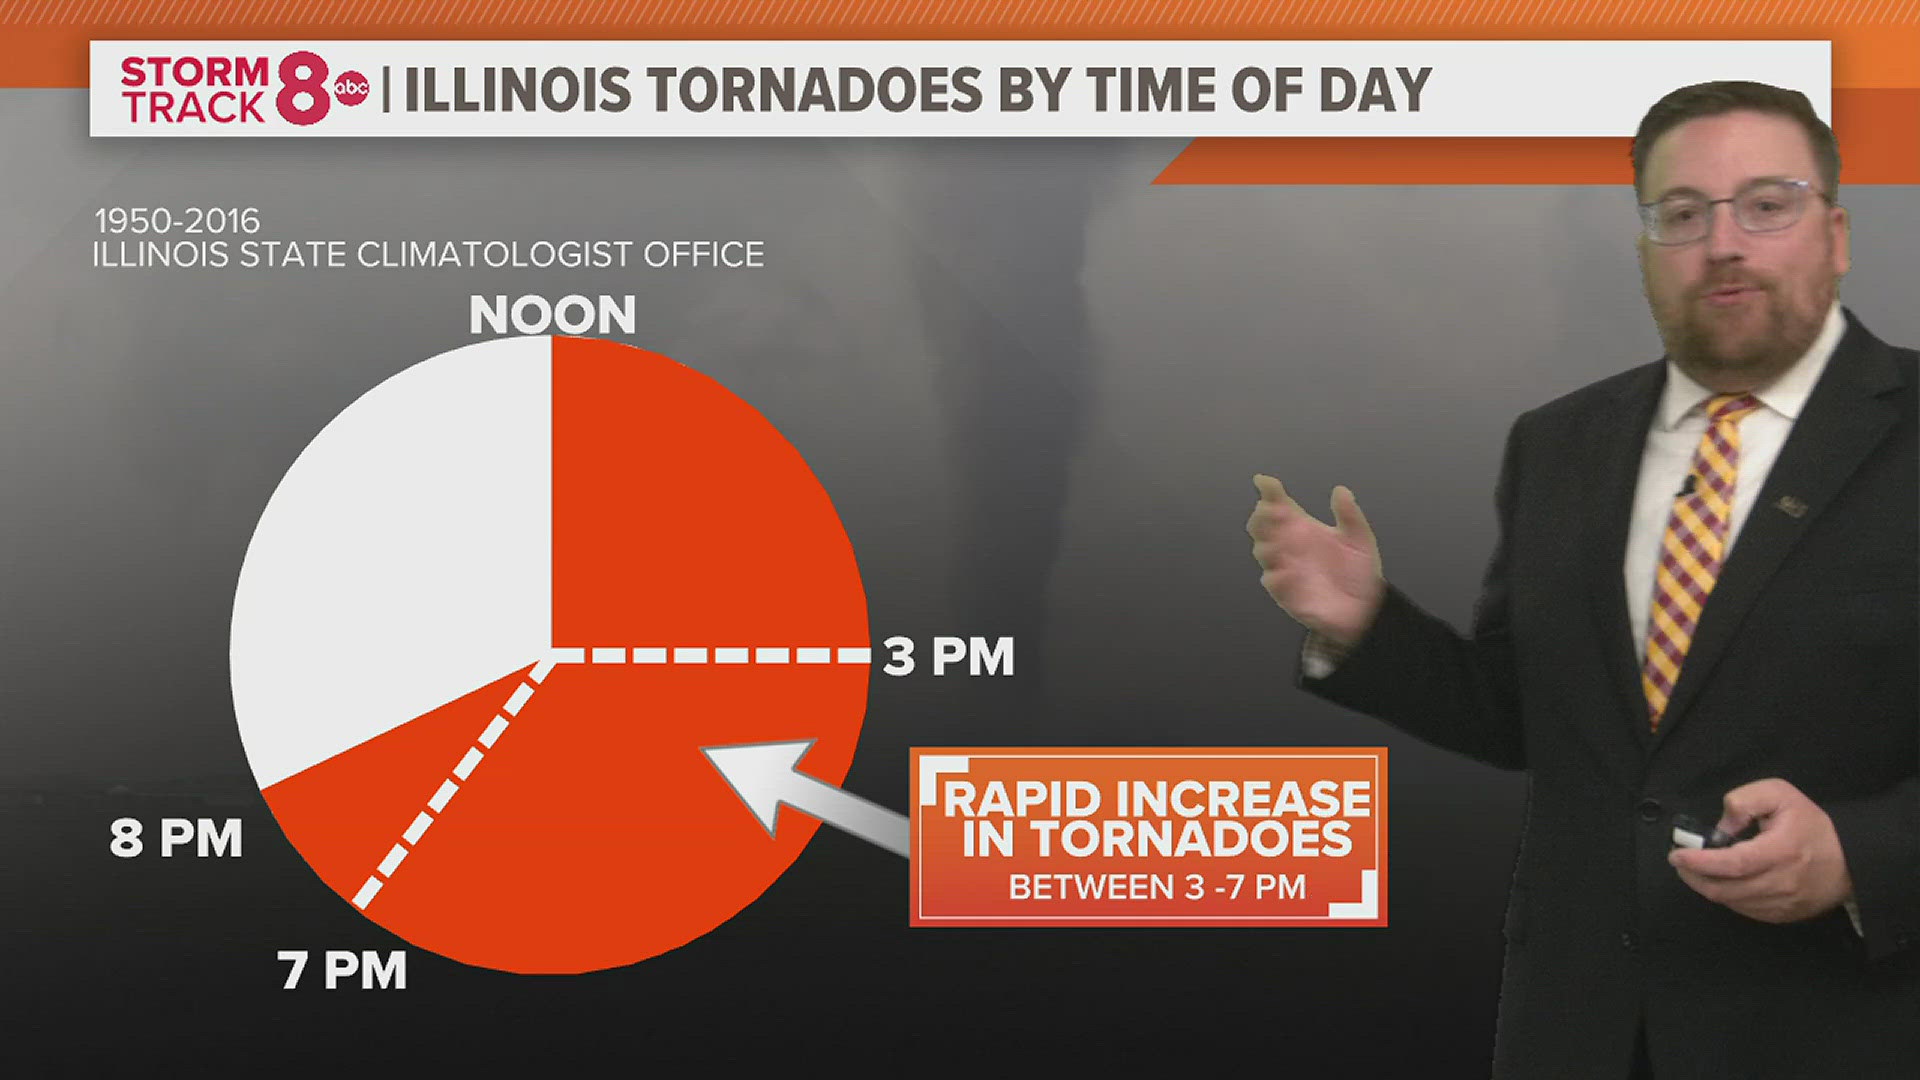 Tornadoes often form during the afternoon and evening by taking advantage of the sun's energy. Here's what drives them at night and the early morning.